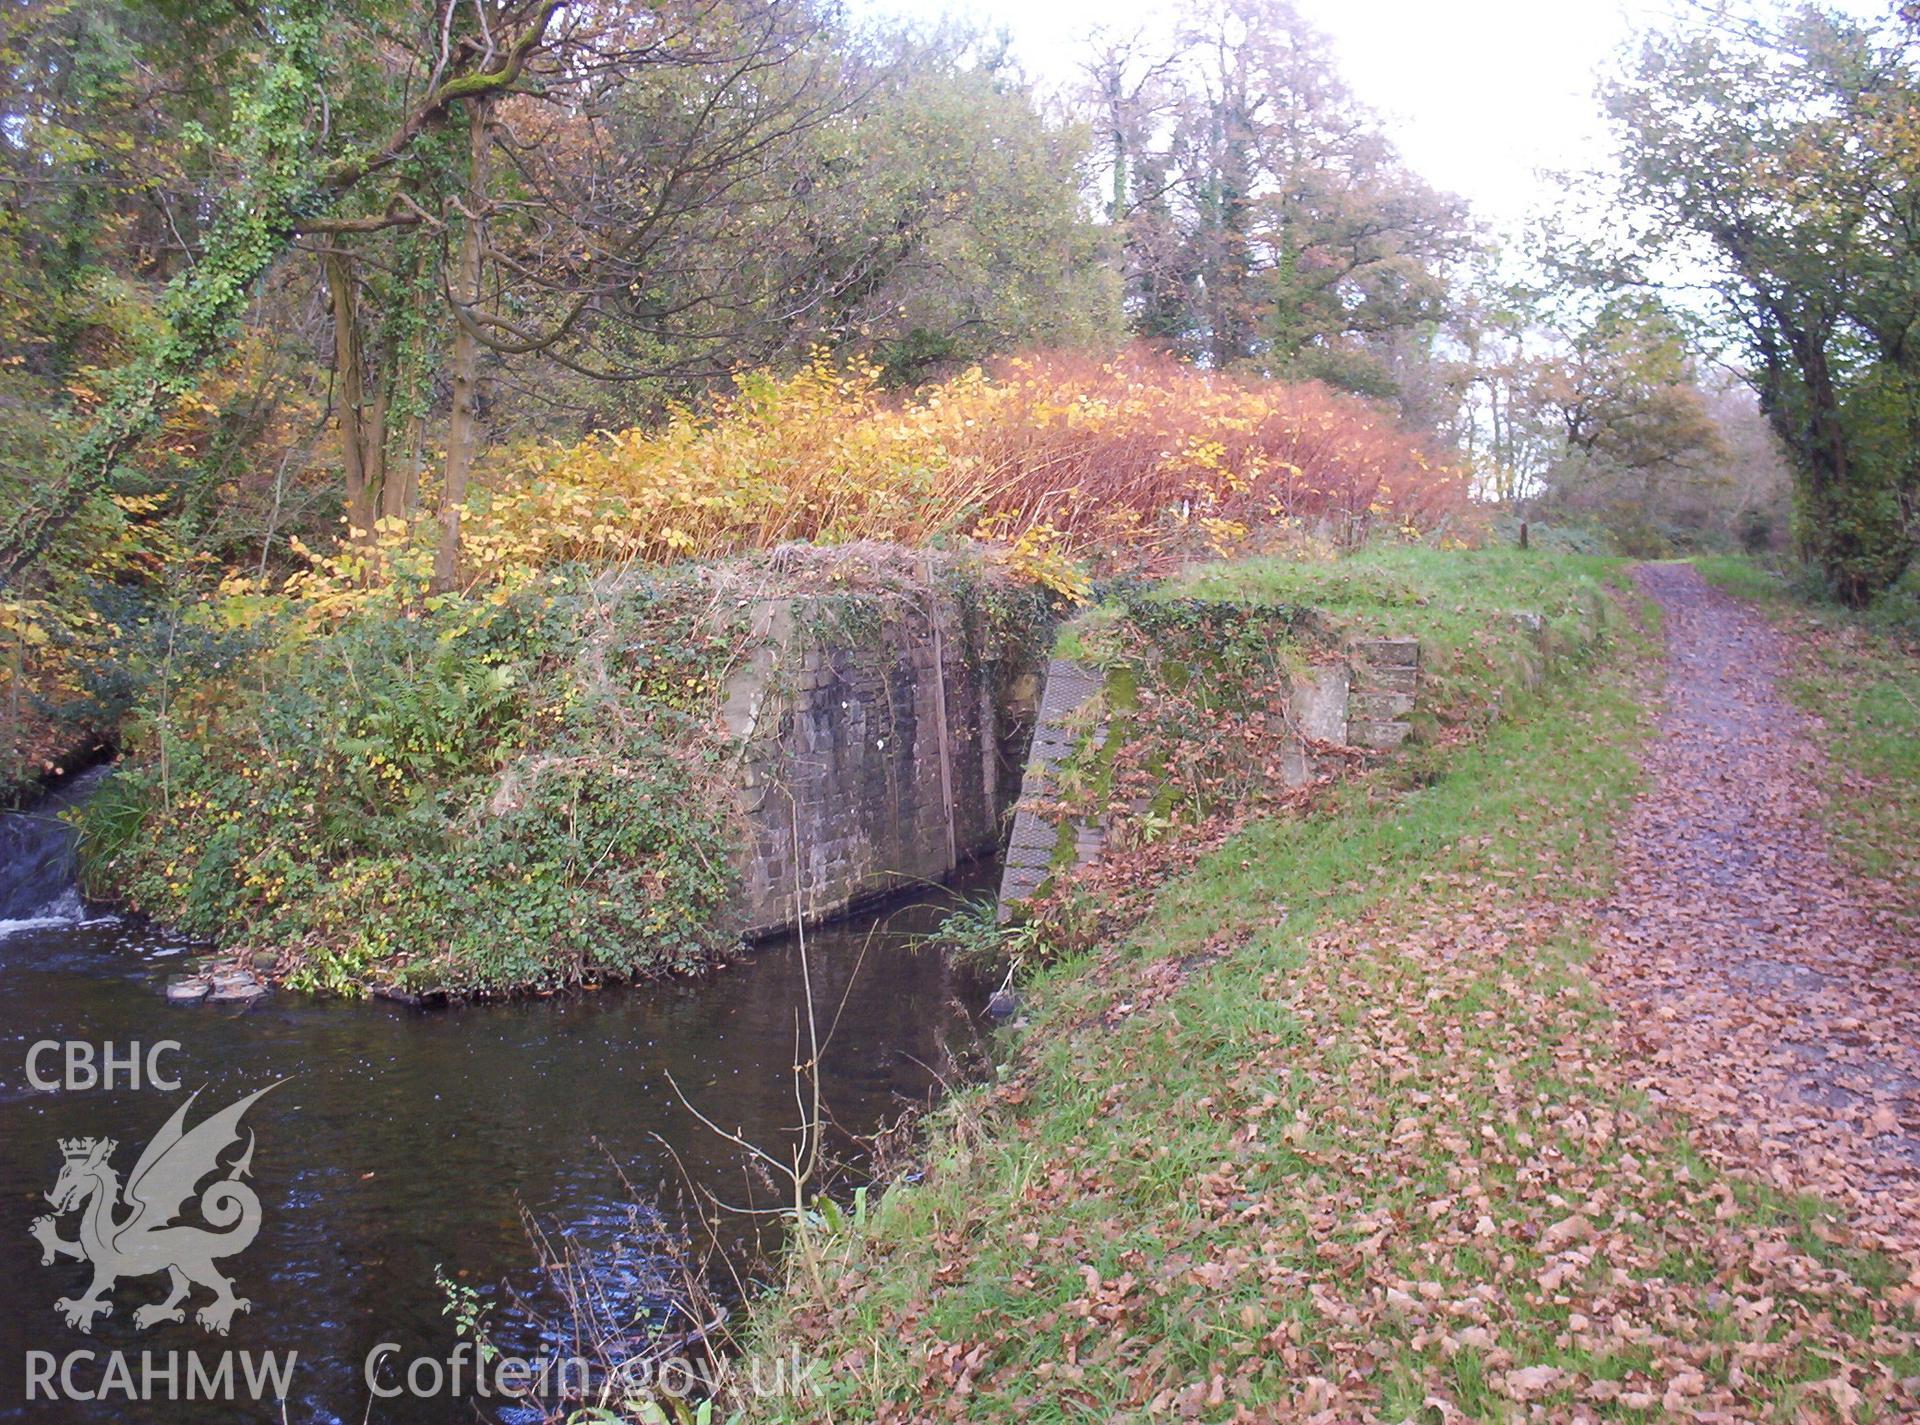 Toe of Lock 12 and towing-path (right) from south.